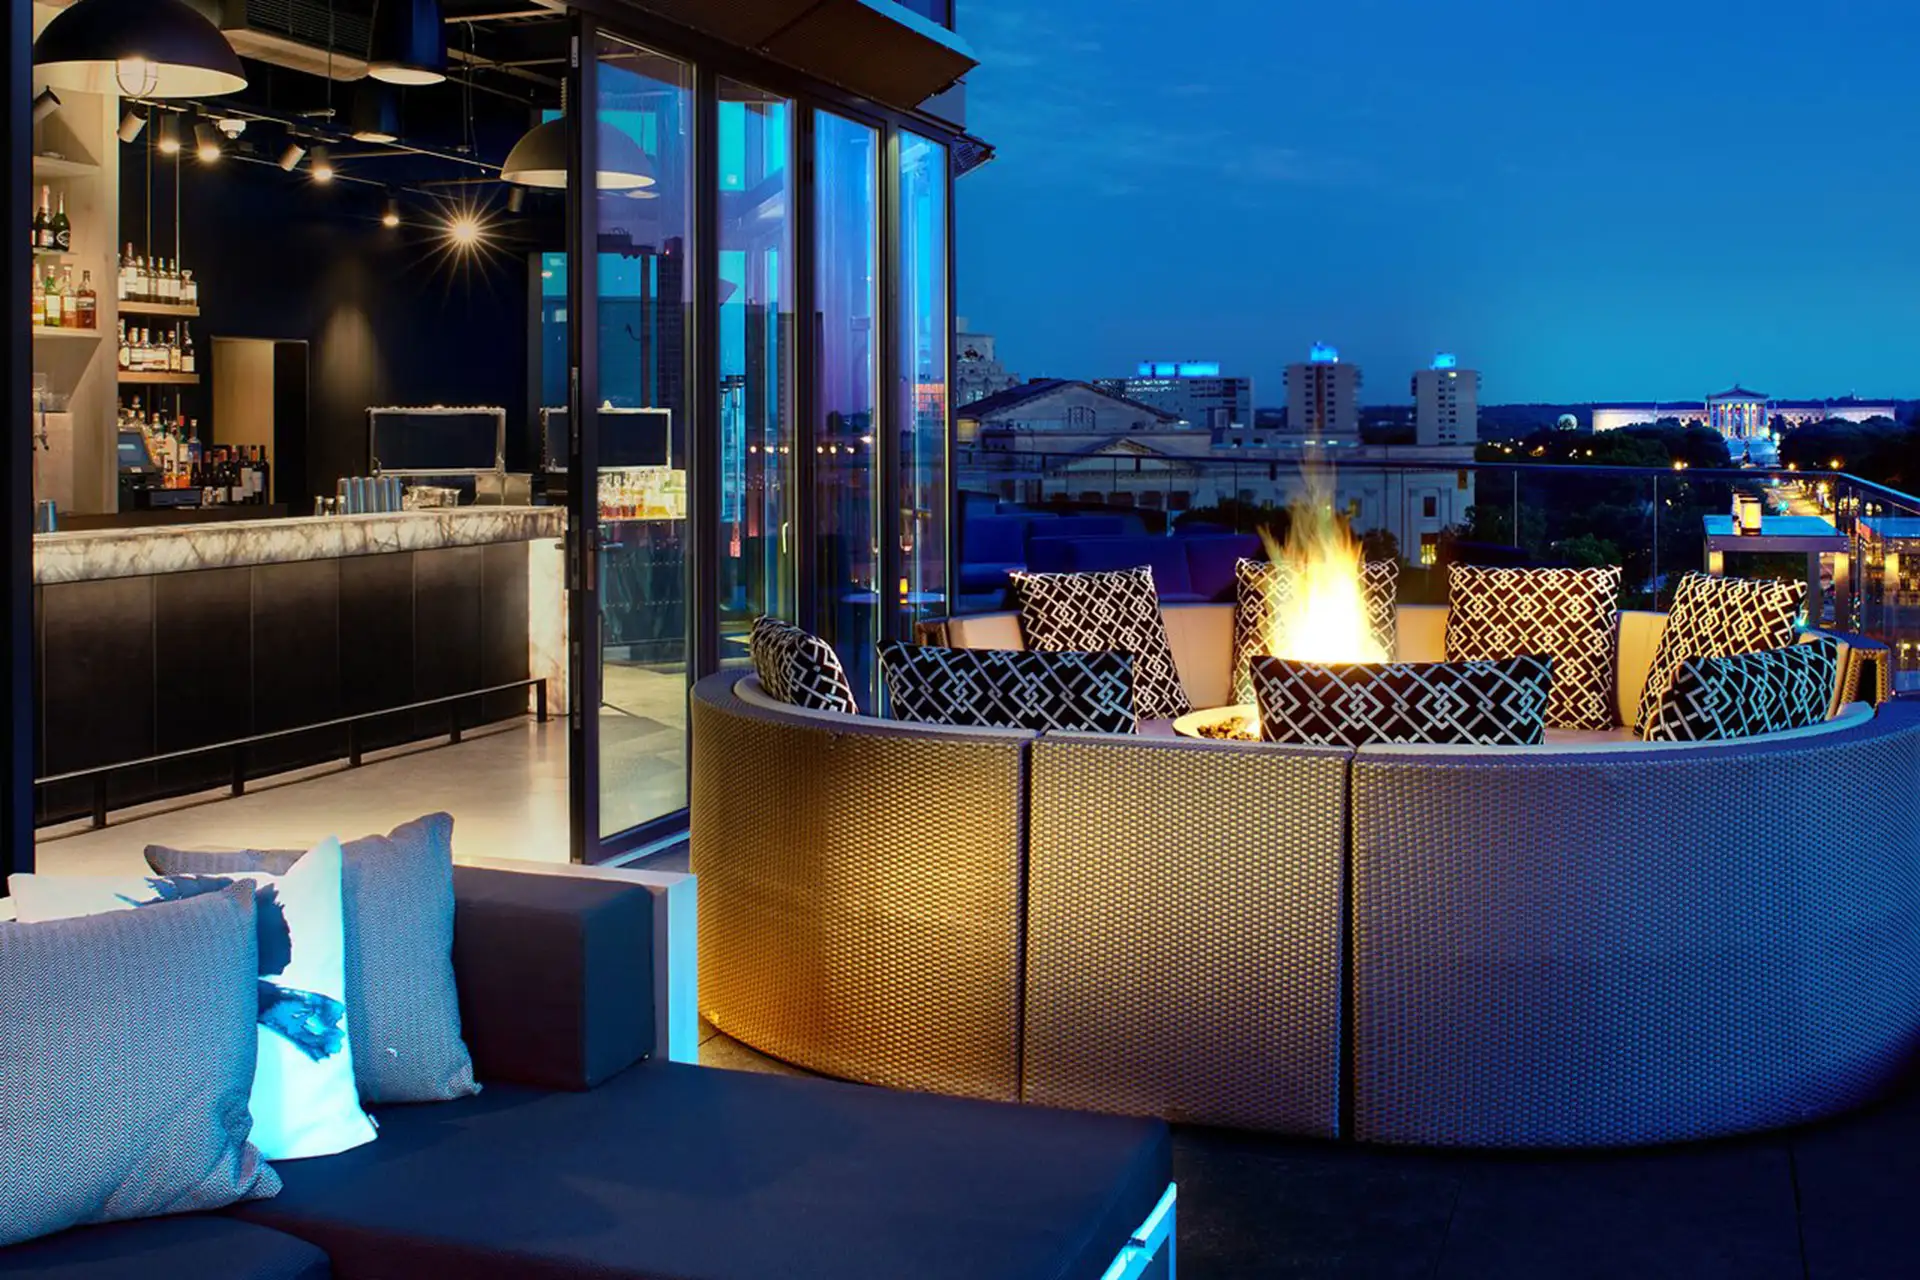 Rooftop Fire Pit at The Logan; Courtesy of The Logan